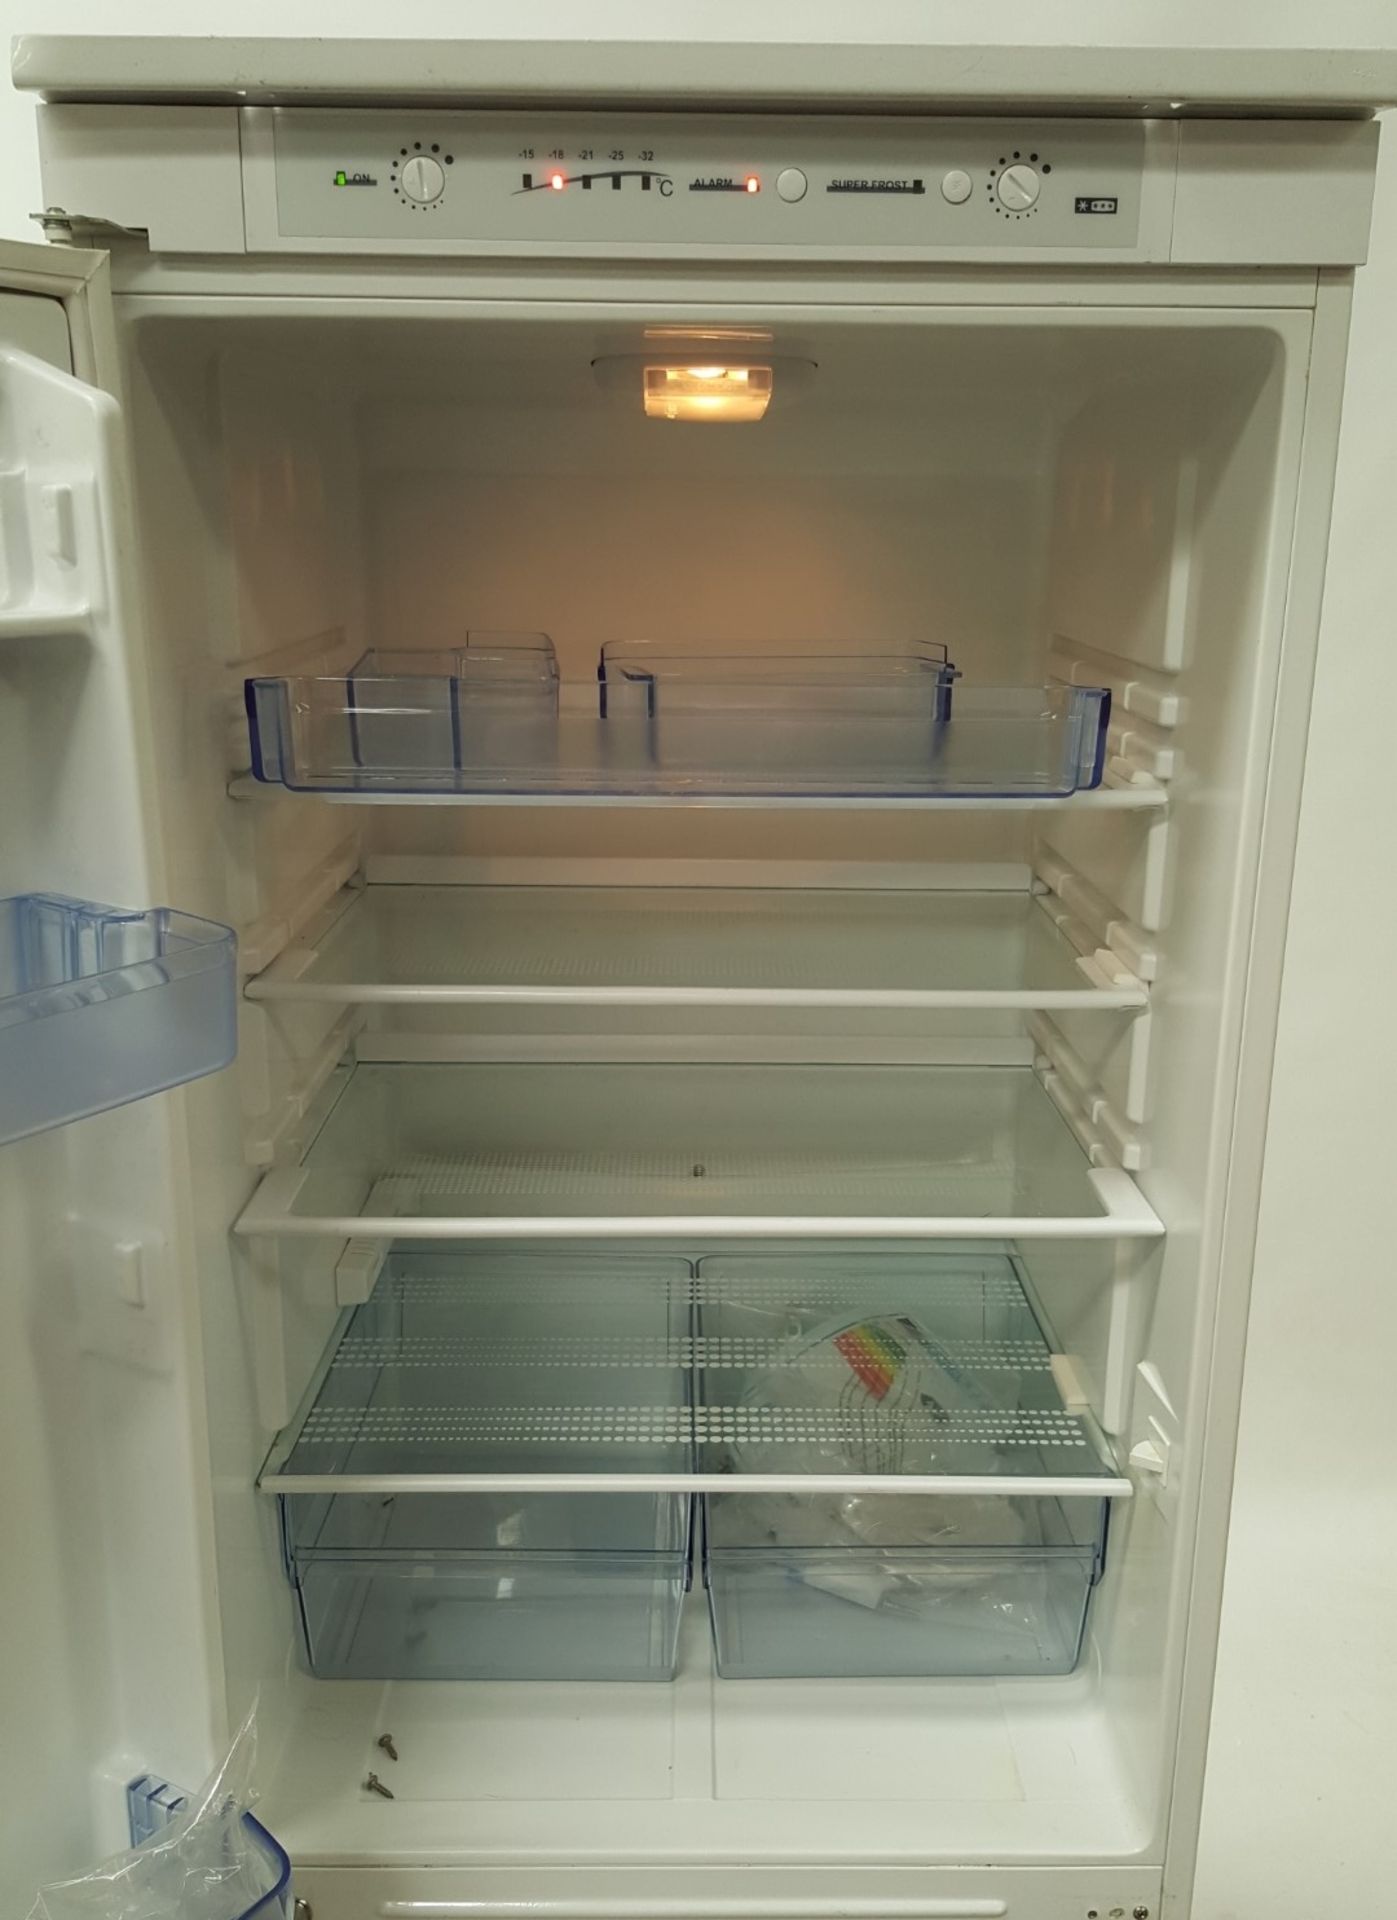 1 x Prima Integrated 60/40 Frost Free Fridge Freezer LPR356A1 - Ref BY189 - Image 2 of 7